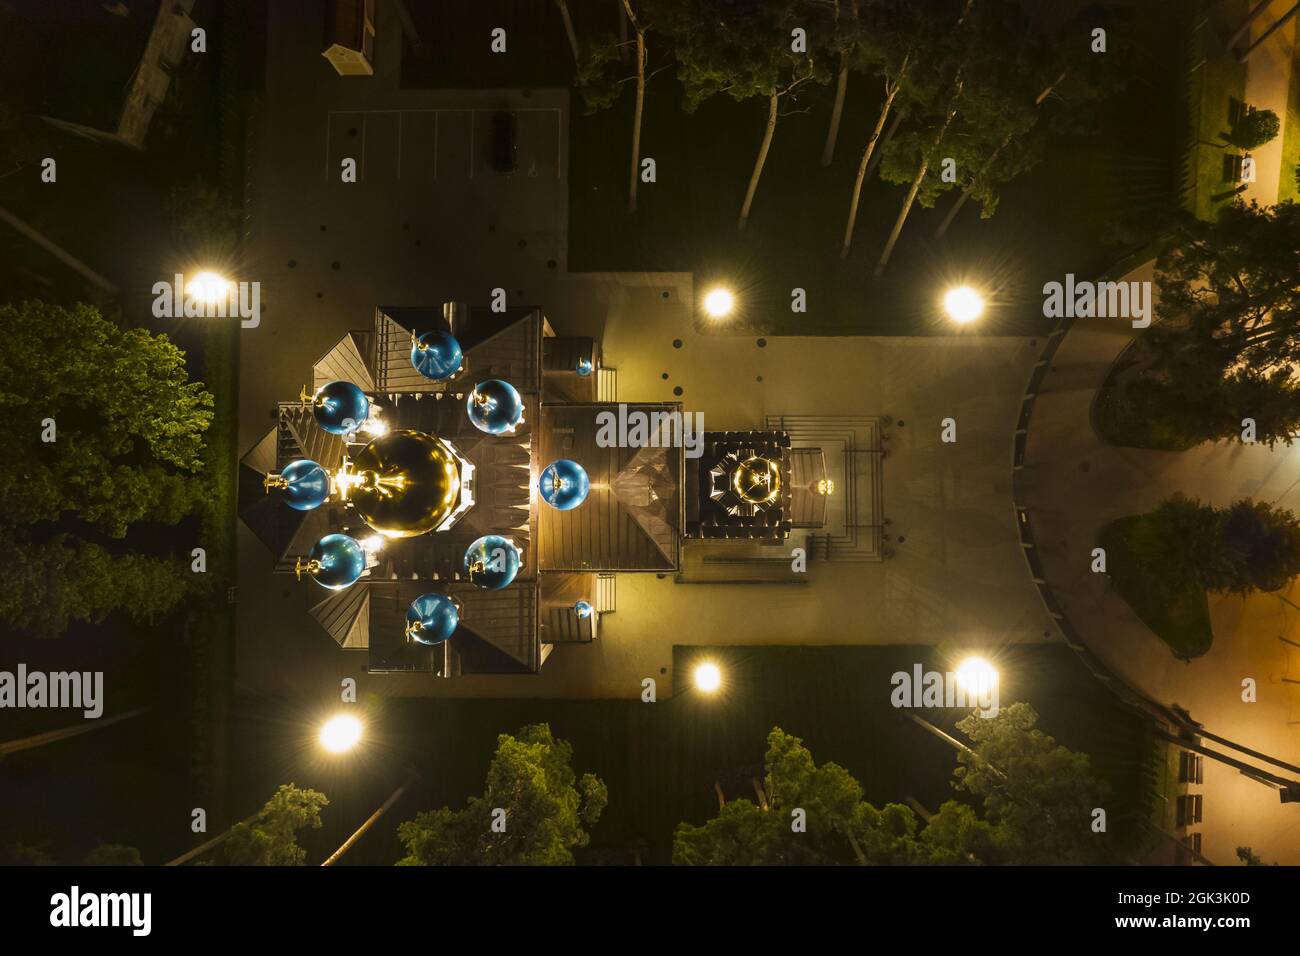 Aerial view of illuminated church between pine trees at night. New public empty white chapel with gold and blue domes outdoors from above. Beautiful Religious, sacred place for ministries Stock Photo